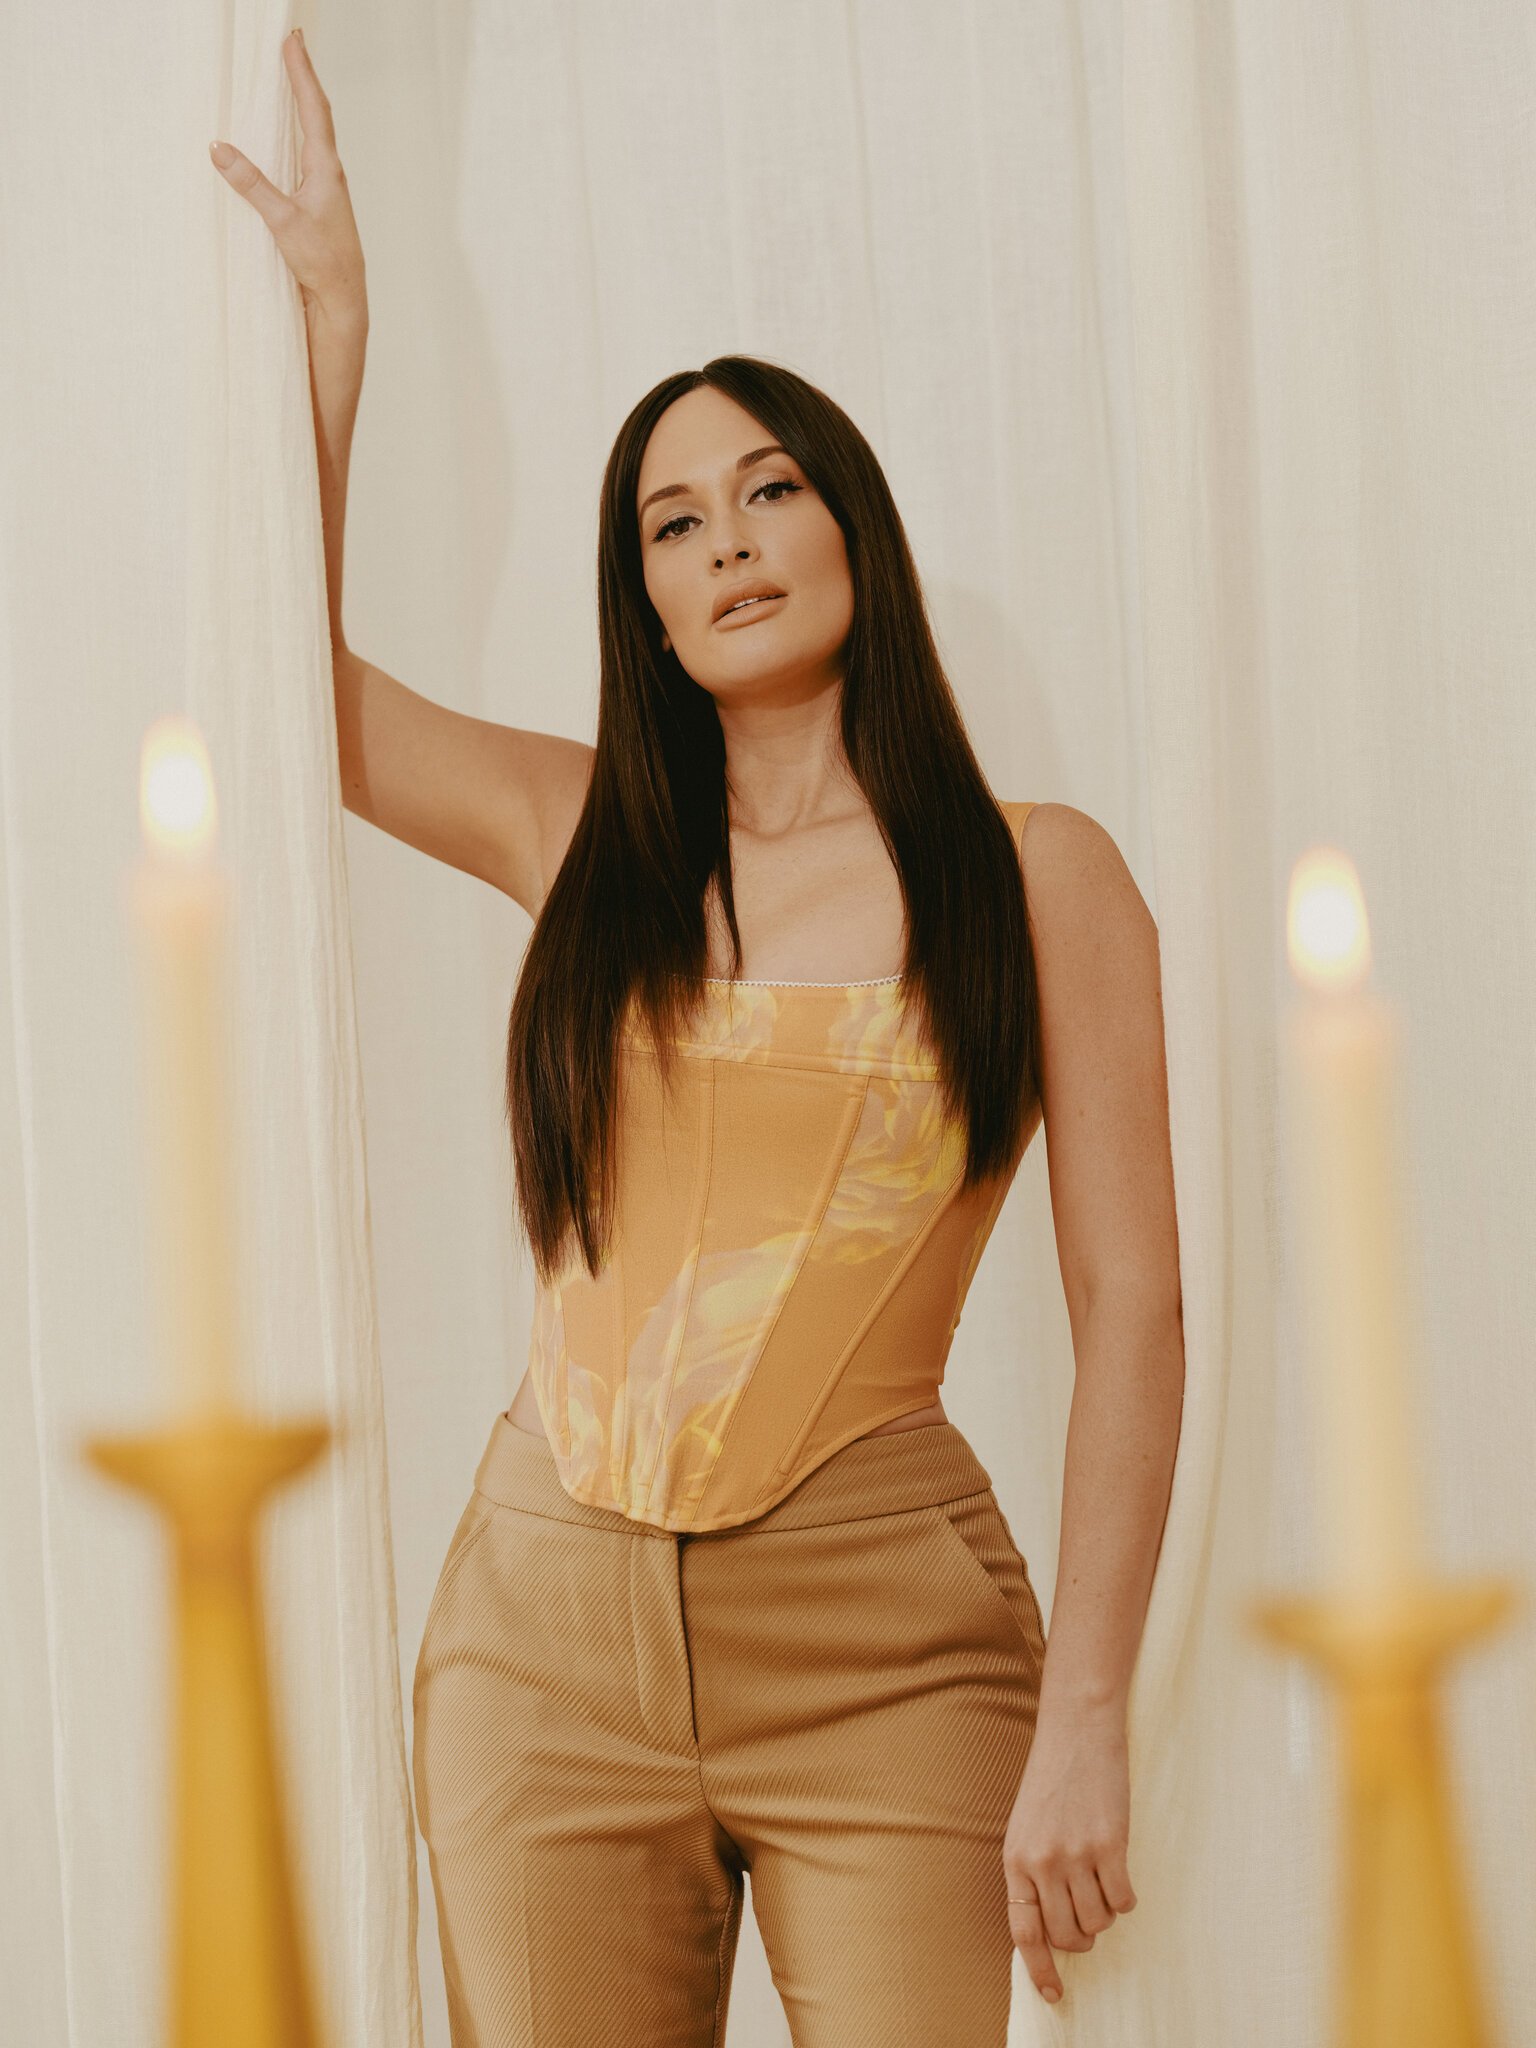 Who is Kacey Musgraves? Everything you need to know.